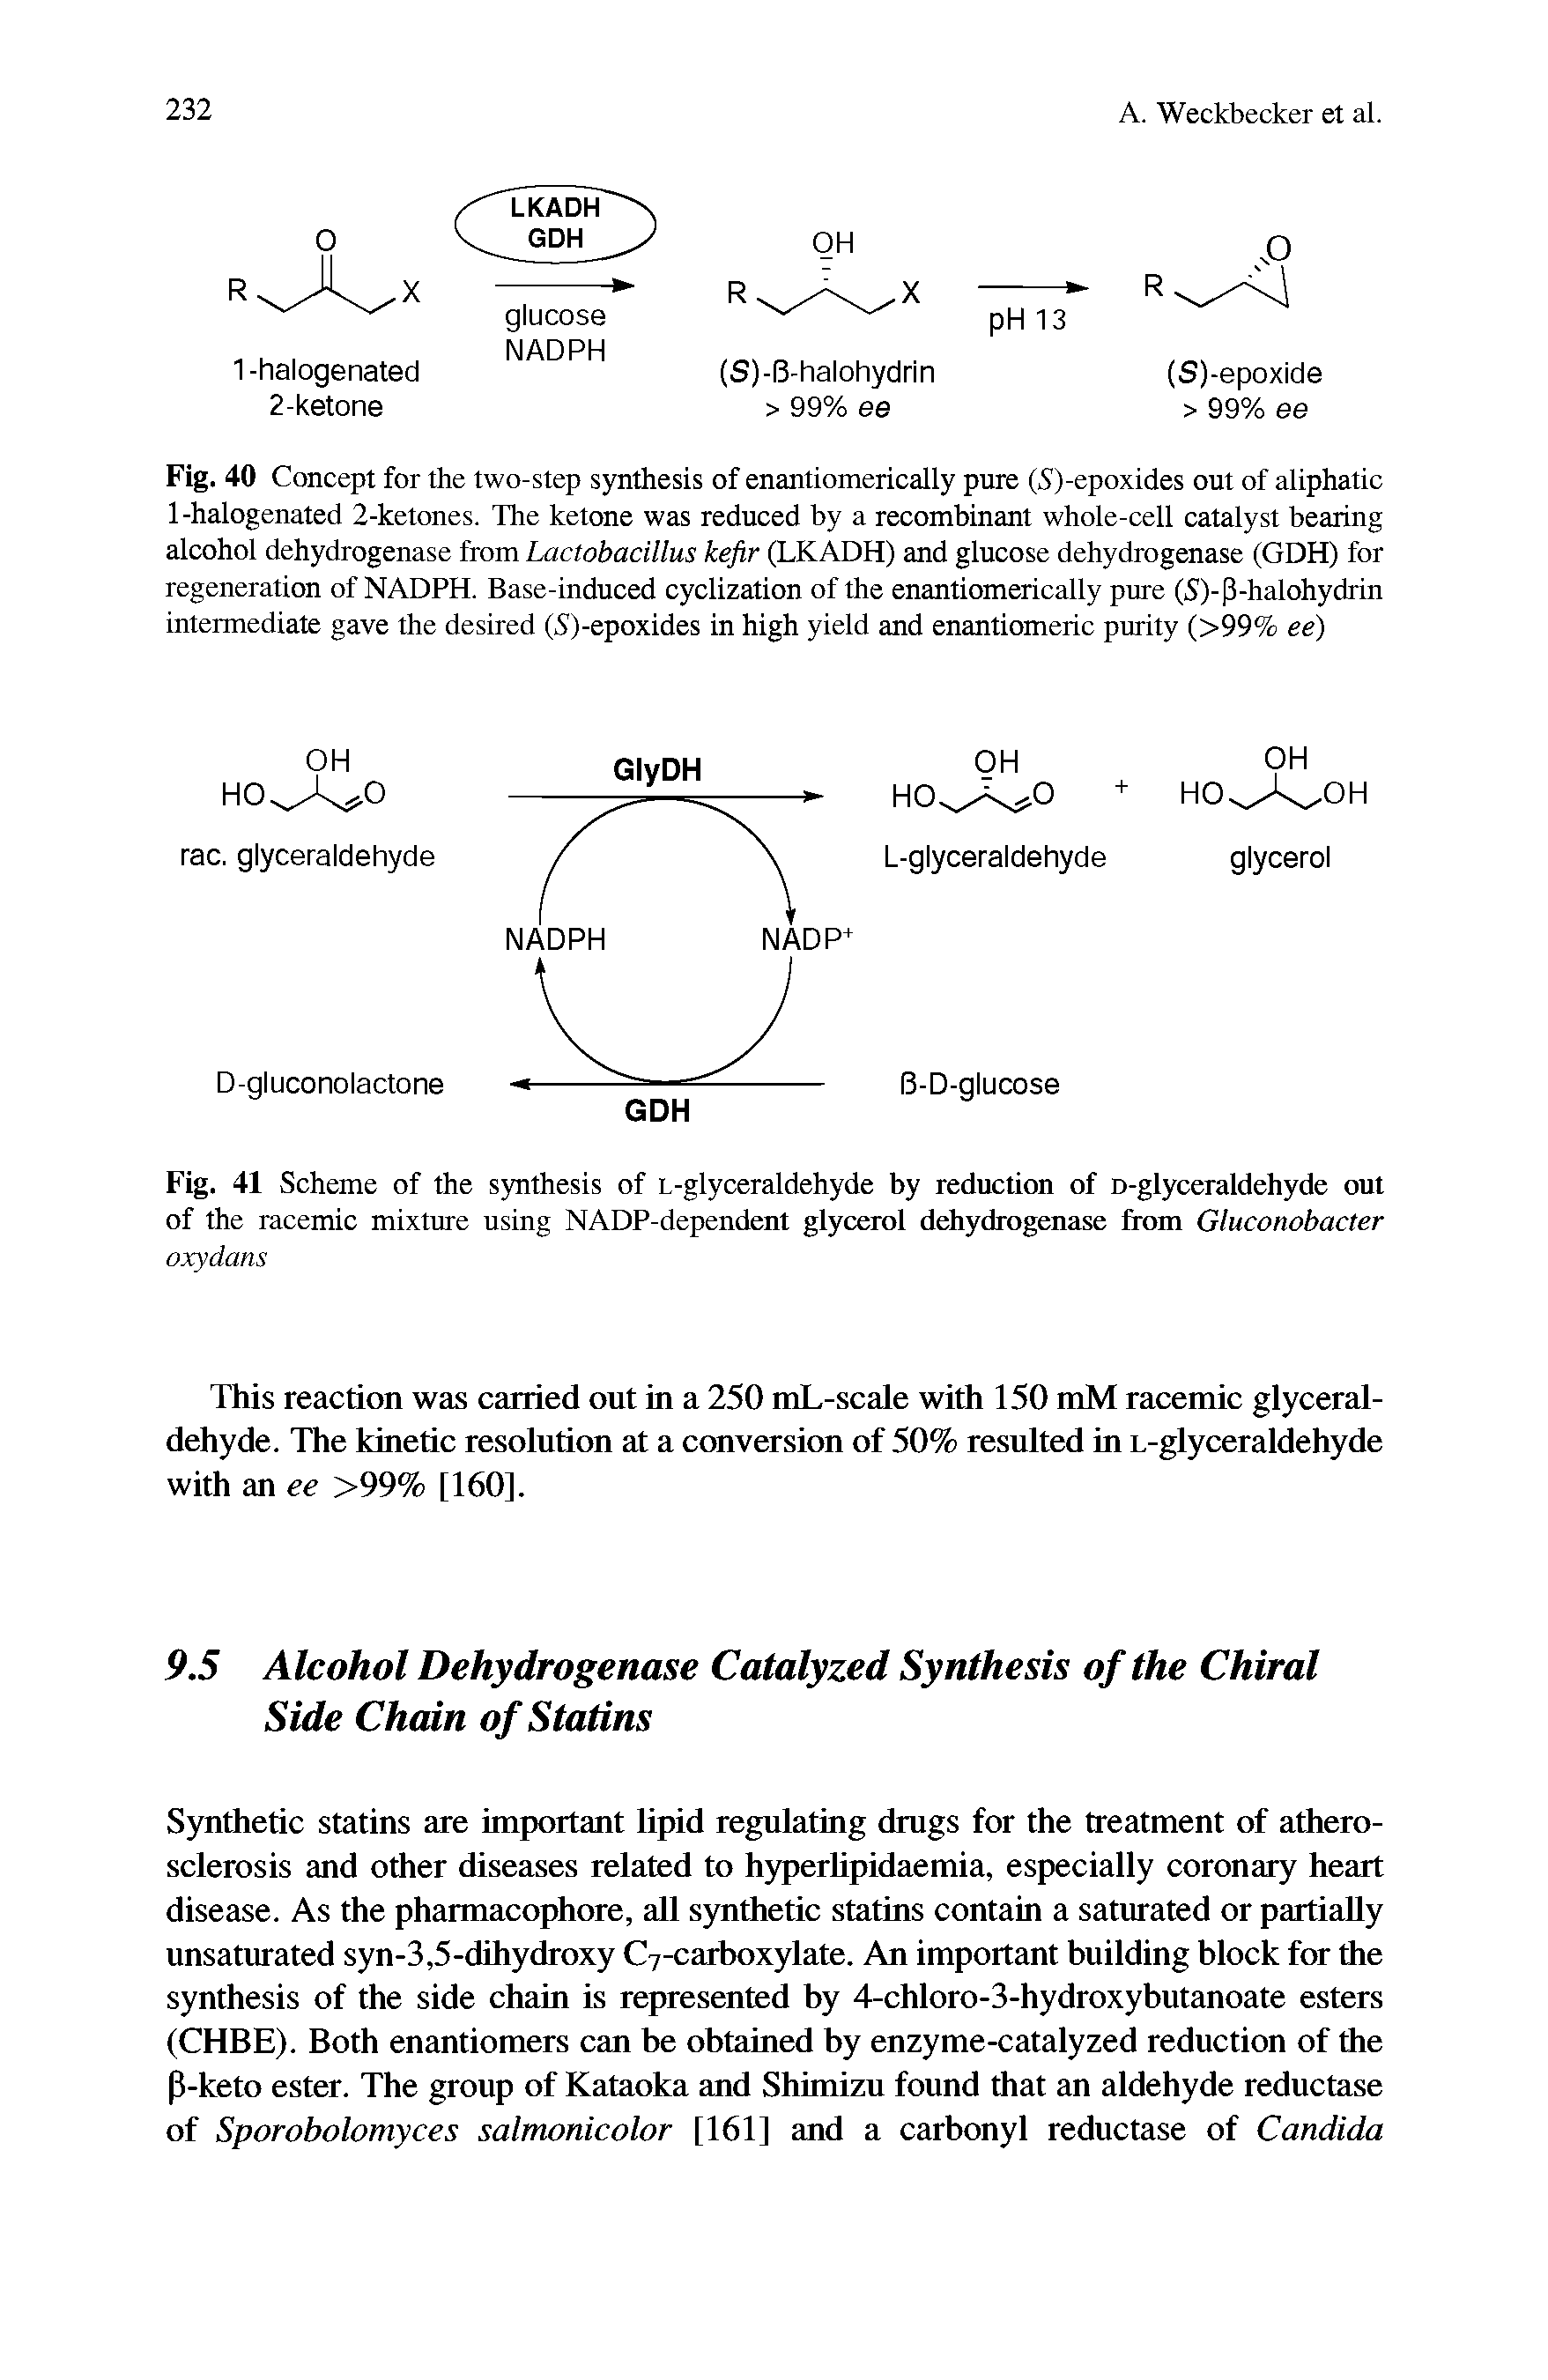 Fig. 40 Concept for the two-step synthesis of enantiomerically pure (S)-epoxides out of aliphatic 1-halogenated 2-ketones. The ketone was reduced by a recombinant whole-cell catalyst bearing alcohol dehydrogenase from Lactobacillus kefir (LKADH) and glucose dehydrogenase (GDH) for regeneration of NADPH. Base-induced cyclization of the enantiomerically pure (5)-(3-halohydrin intermediate gave the desired (S)-epoxides in high yield and enantiomeric purity (>99% ee)...